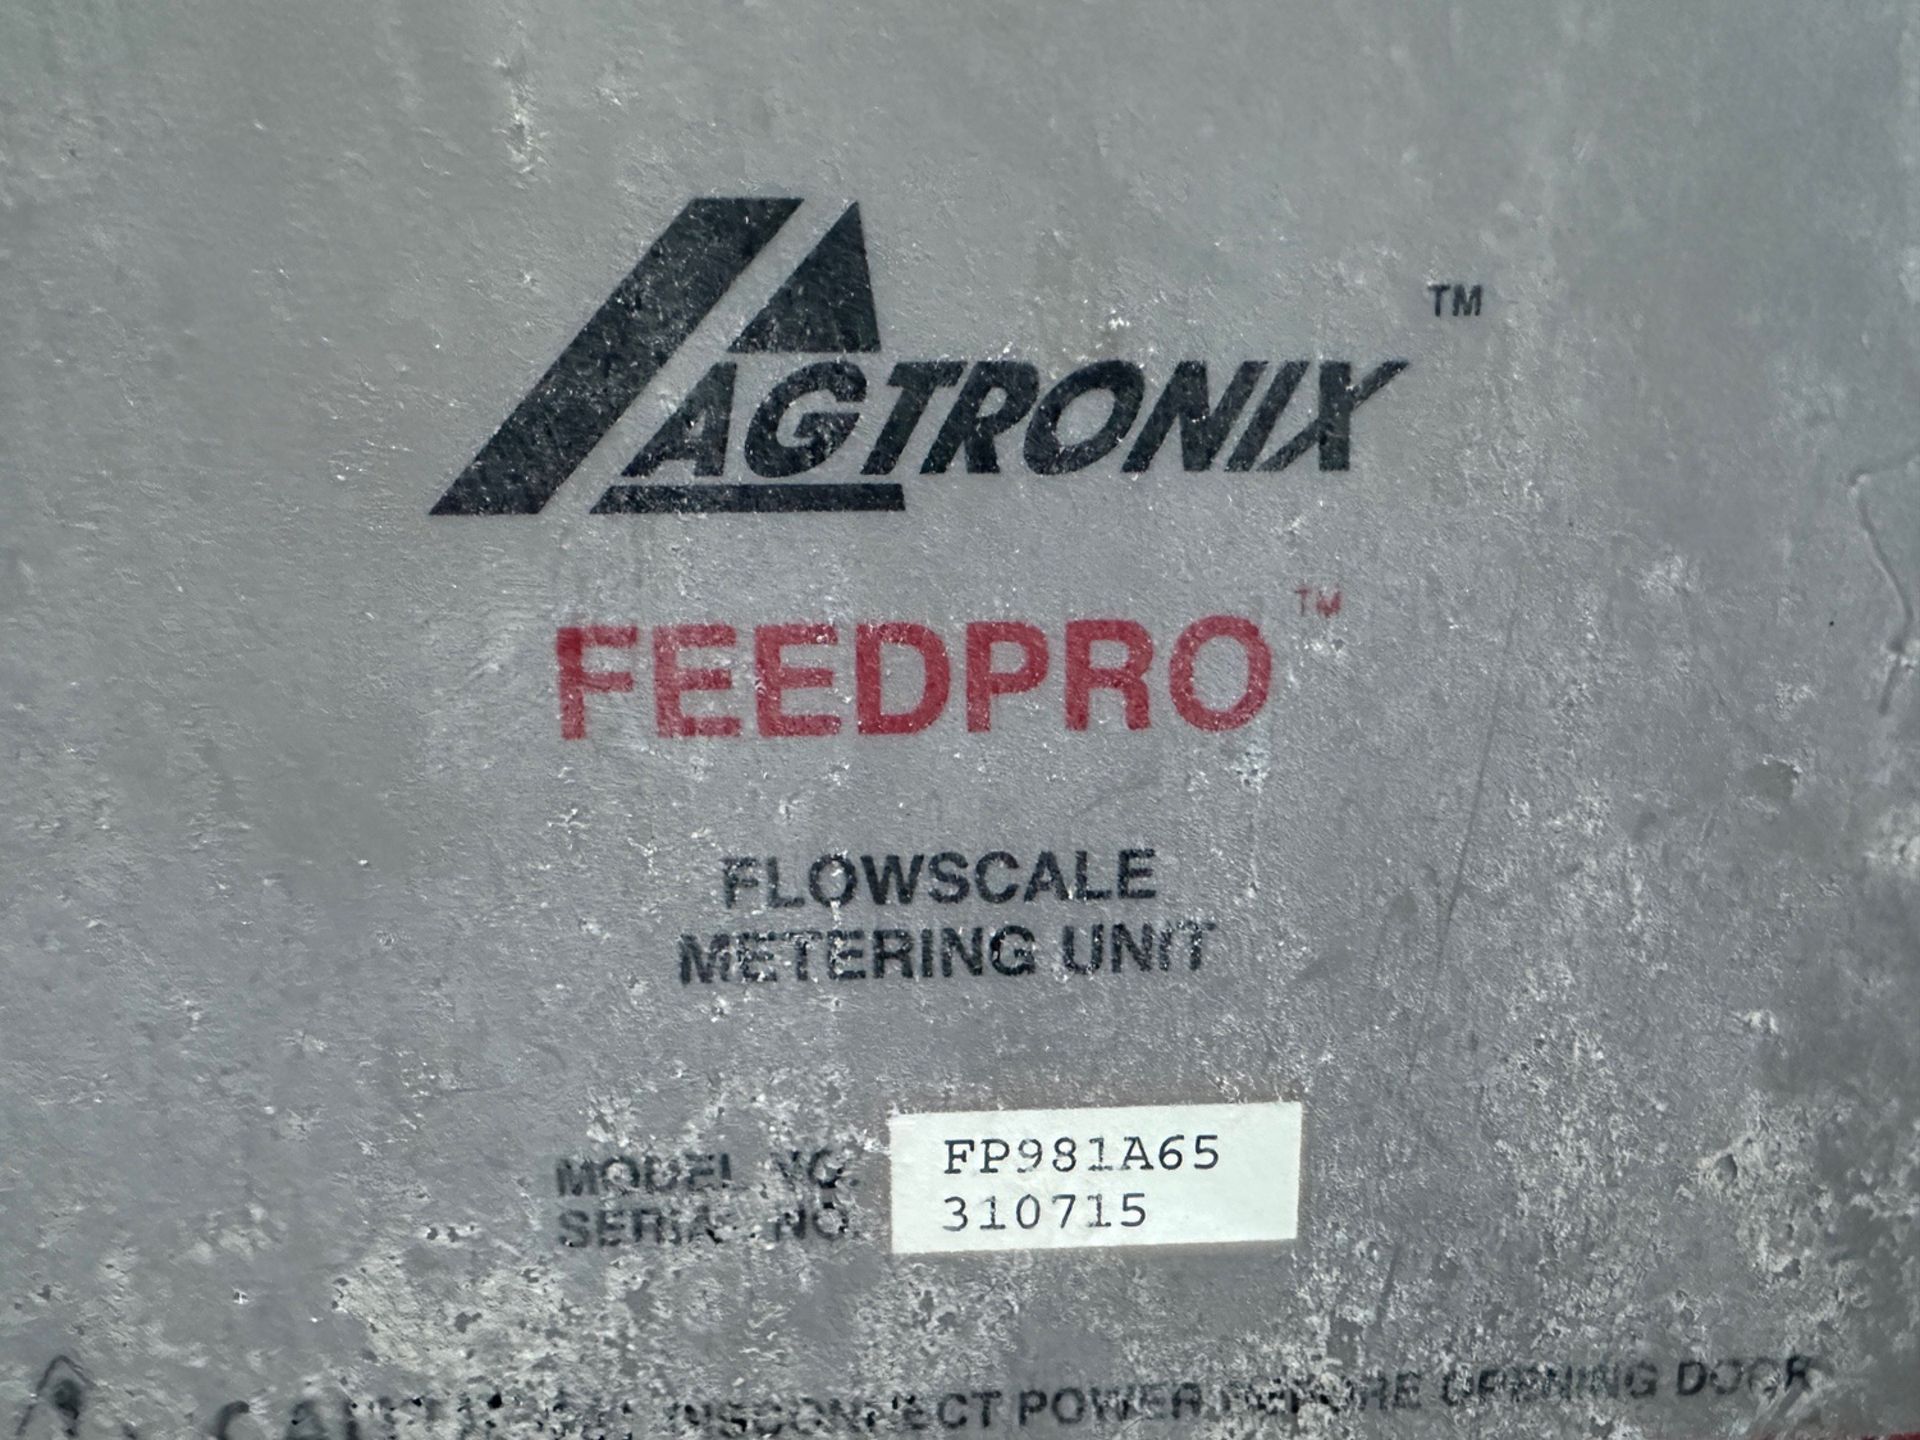 Agtronix Feedpro with Flowscale Metering Unit (2 Row) - Model FP981A65 - S/N 310715 | Rig Fee $500 - Image 2 of 3